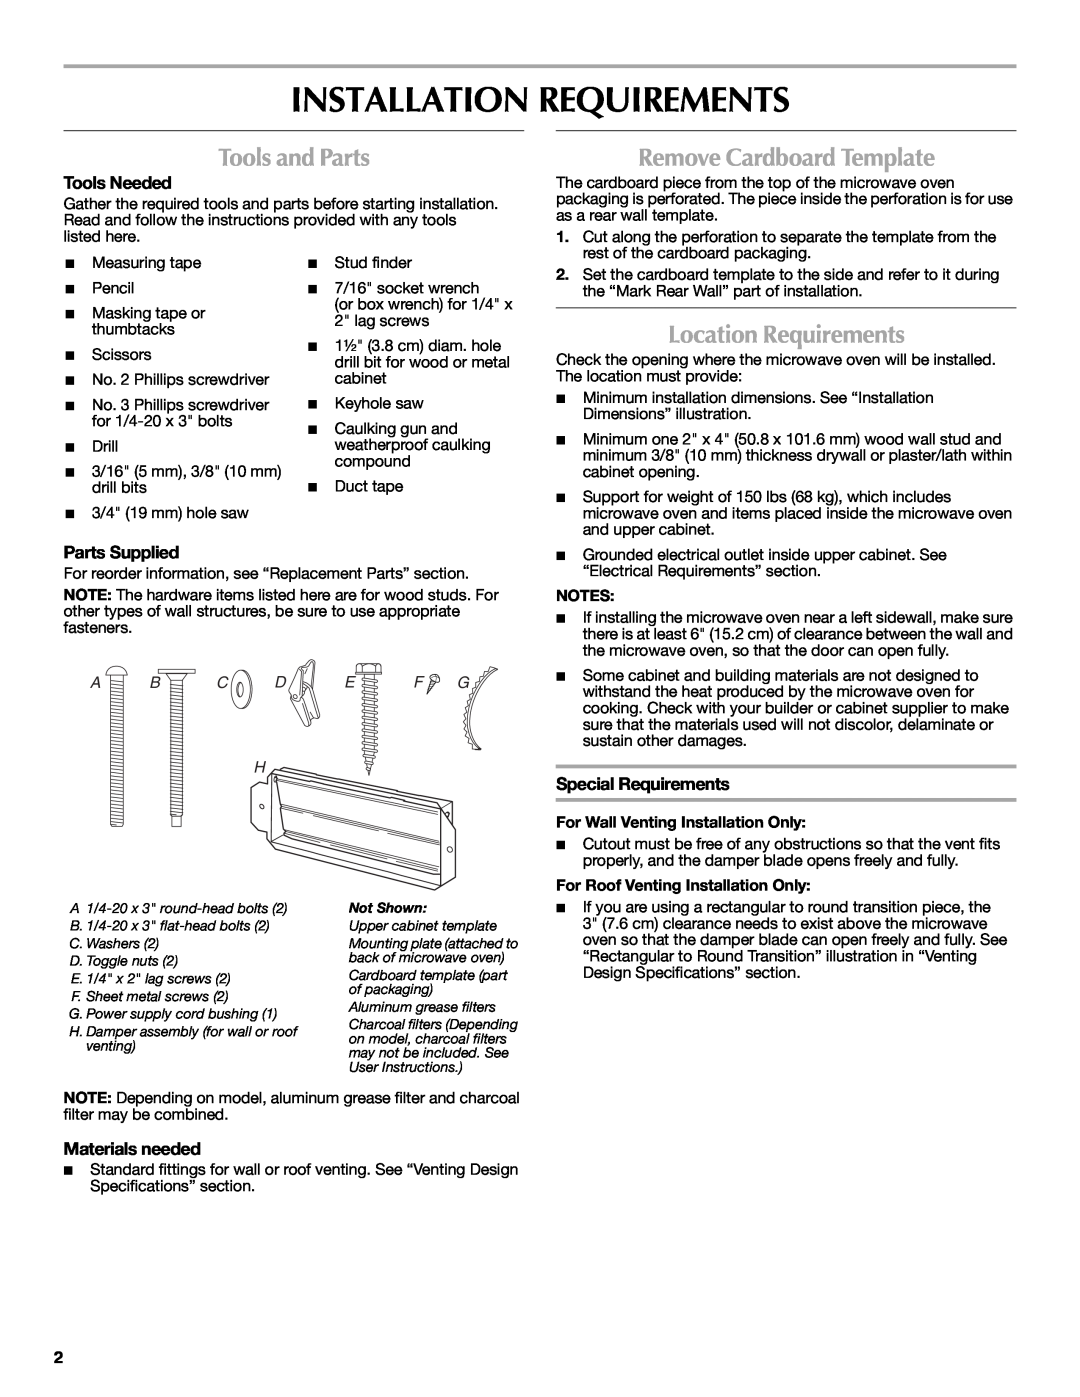 Maytag MMV5208WS Installation Requirements, Tools and Parts, Remove Cardboard Template, Location Requirements 